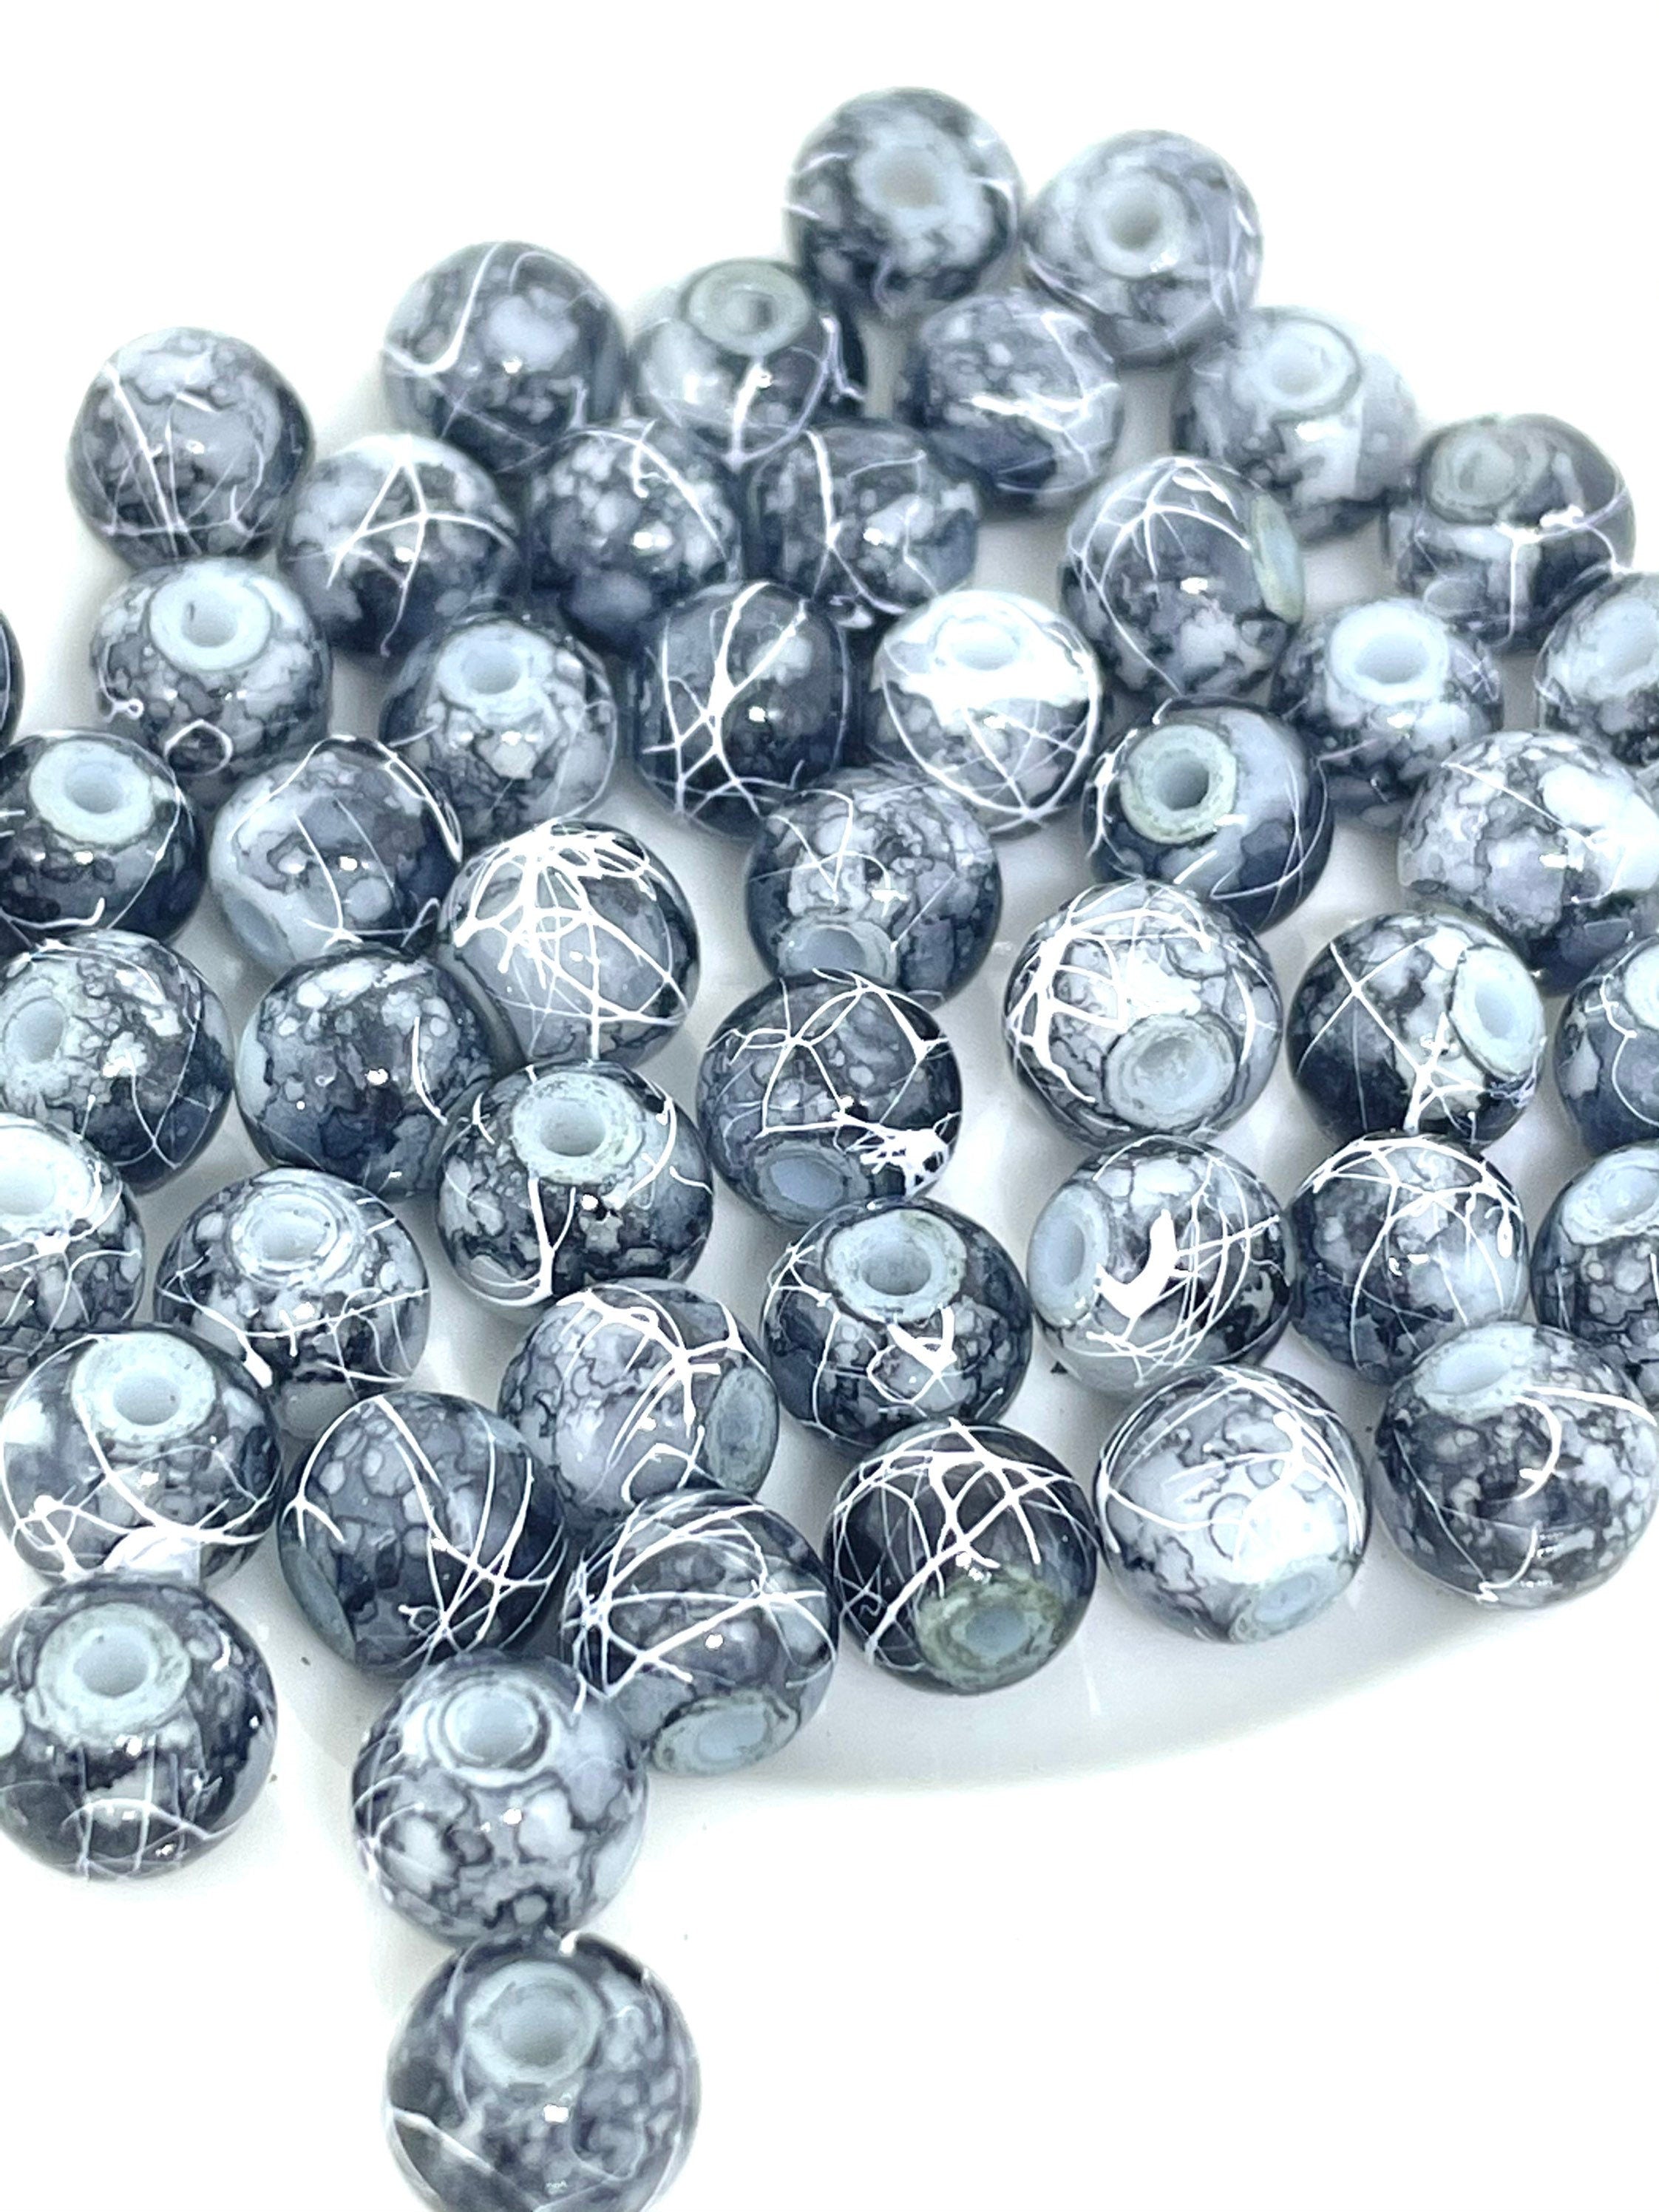 Black and White Marble Beads, Black and White Beads, Black and White T